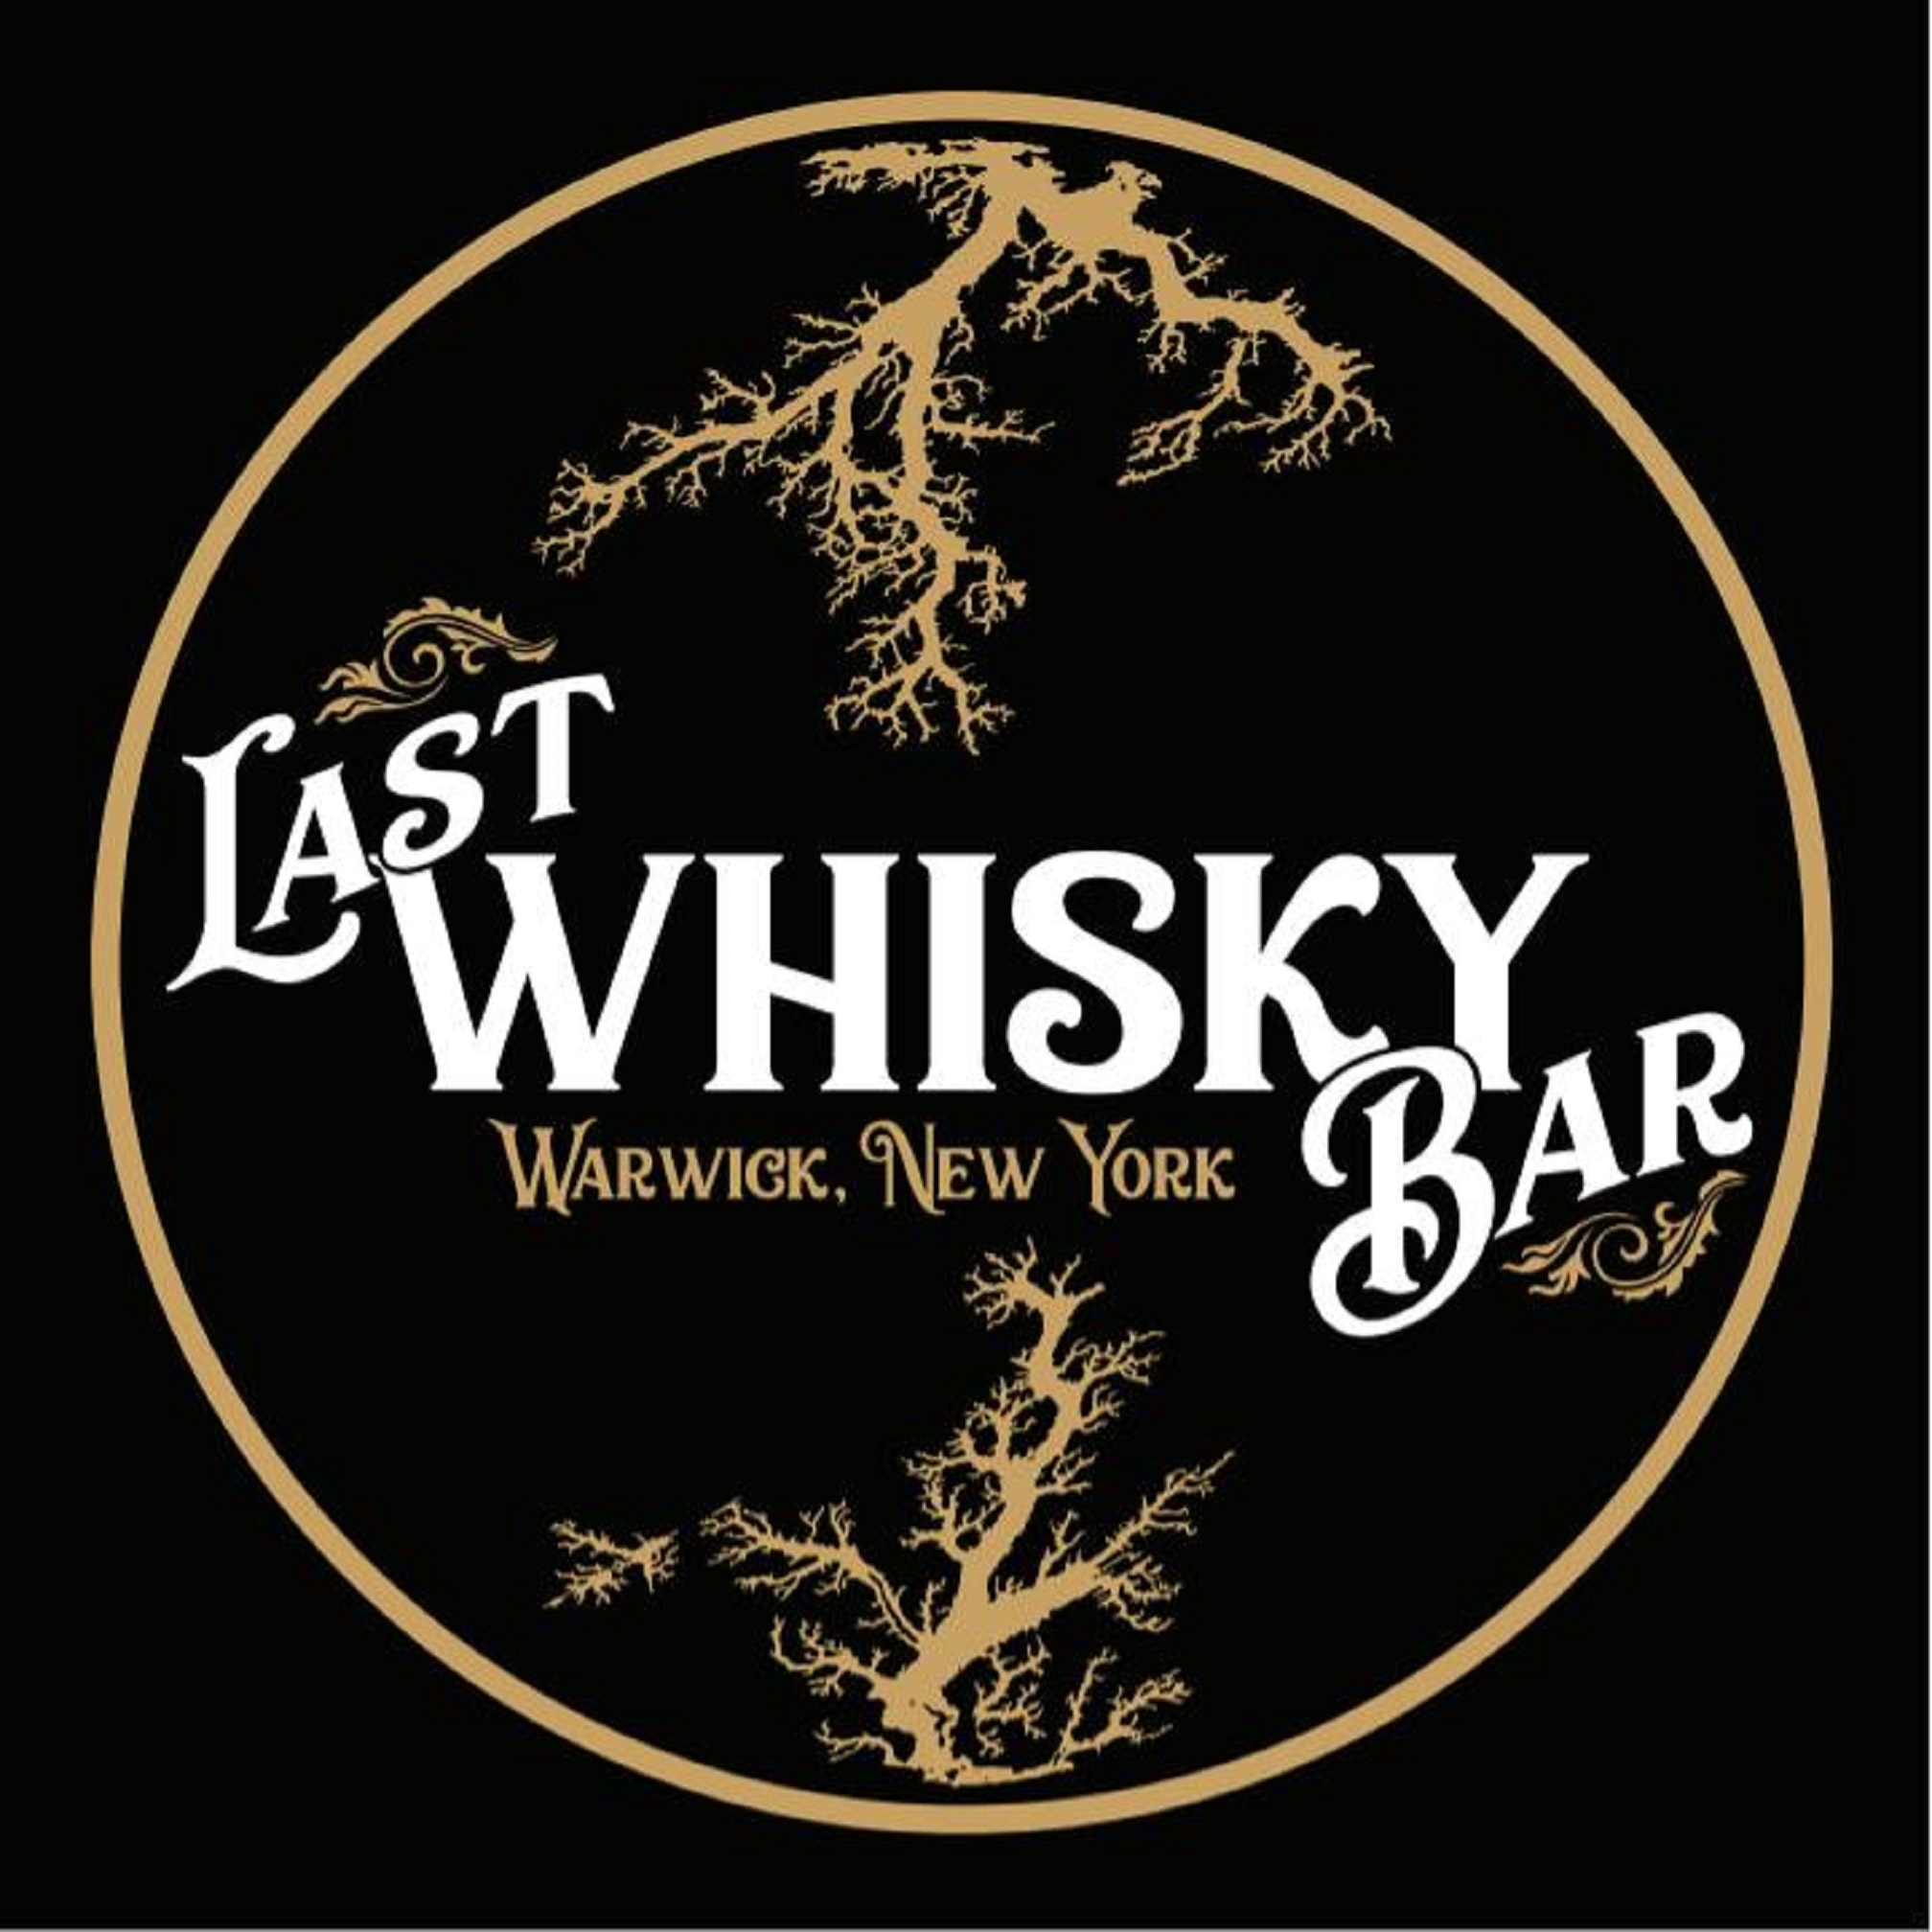 Saturday Afternoon Jazz at The Last Whisky Bar